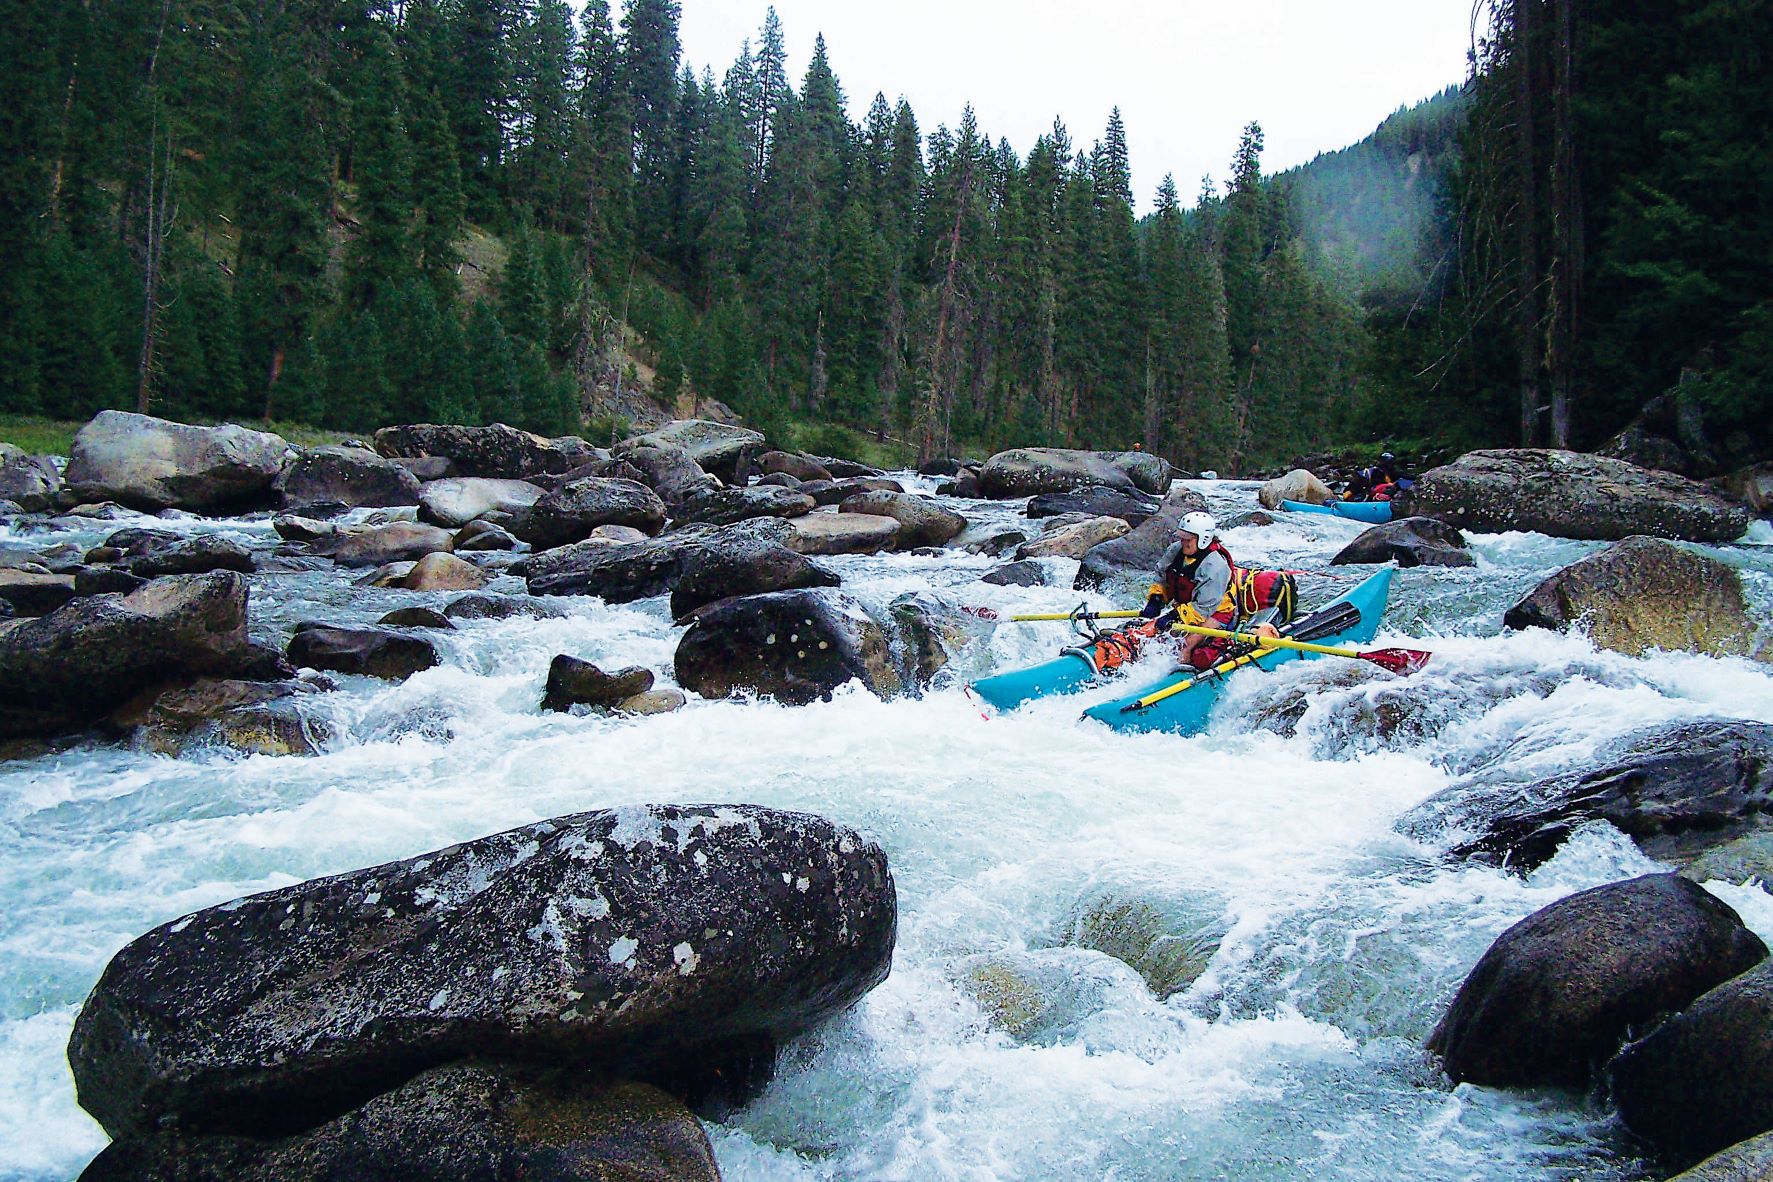 Person rafting through class IV whitewater rapids on the Selway River. Inflatable blue raft, yellow oars, and woman wears a safety helmet and PFD.